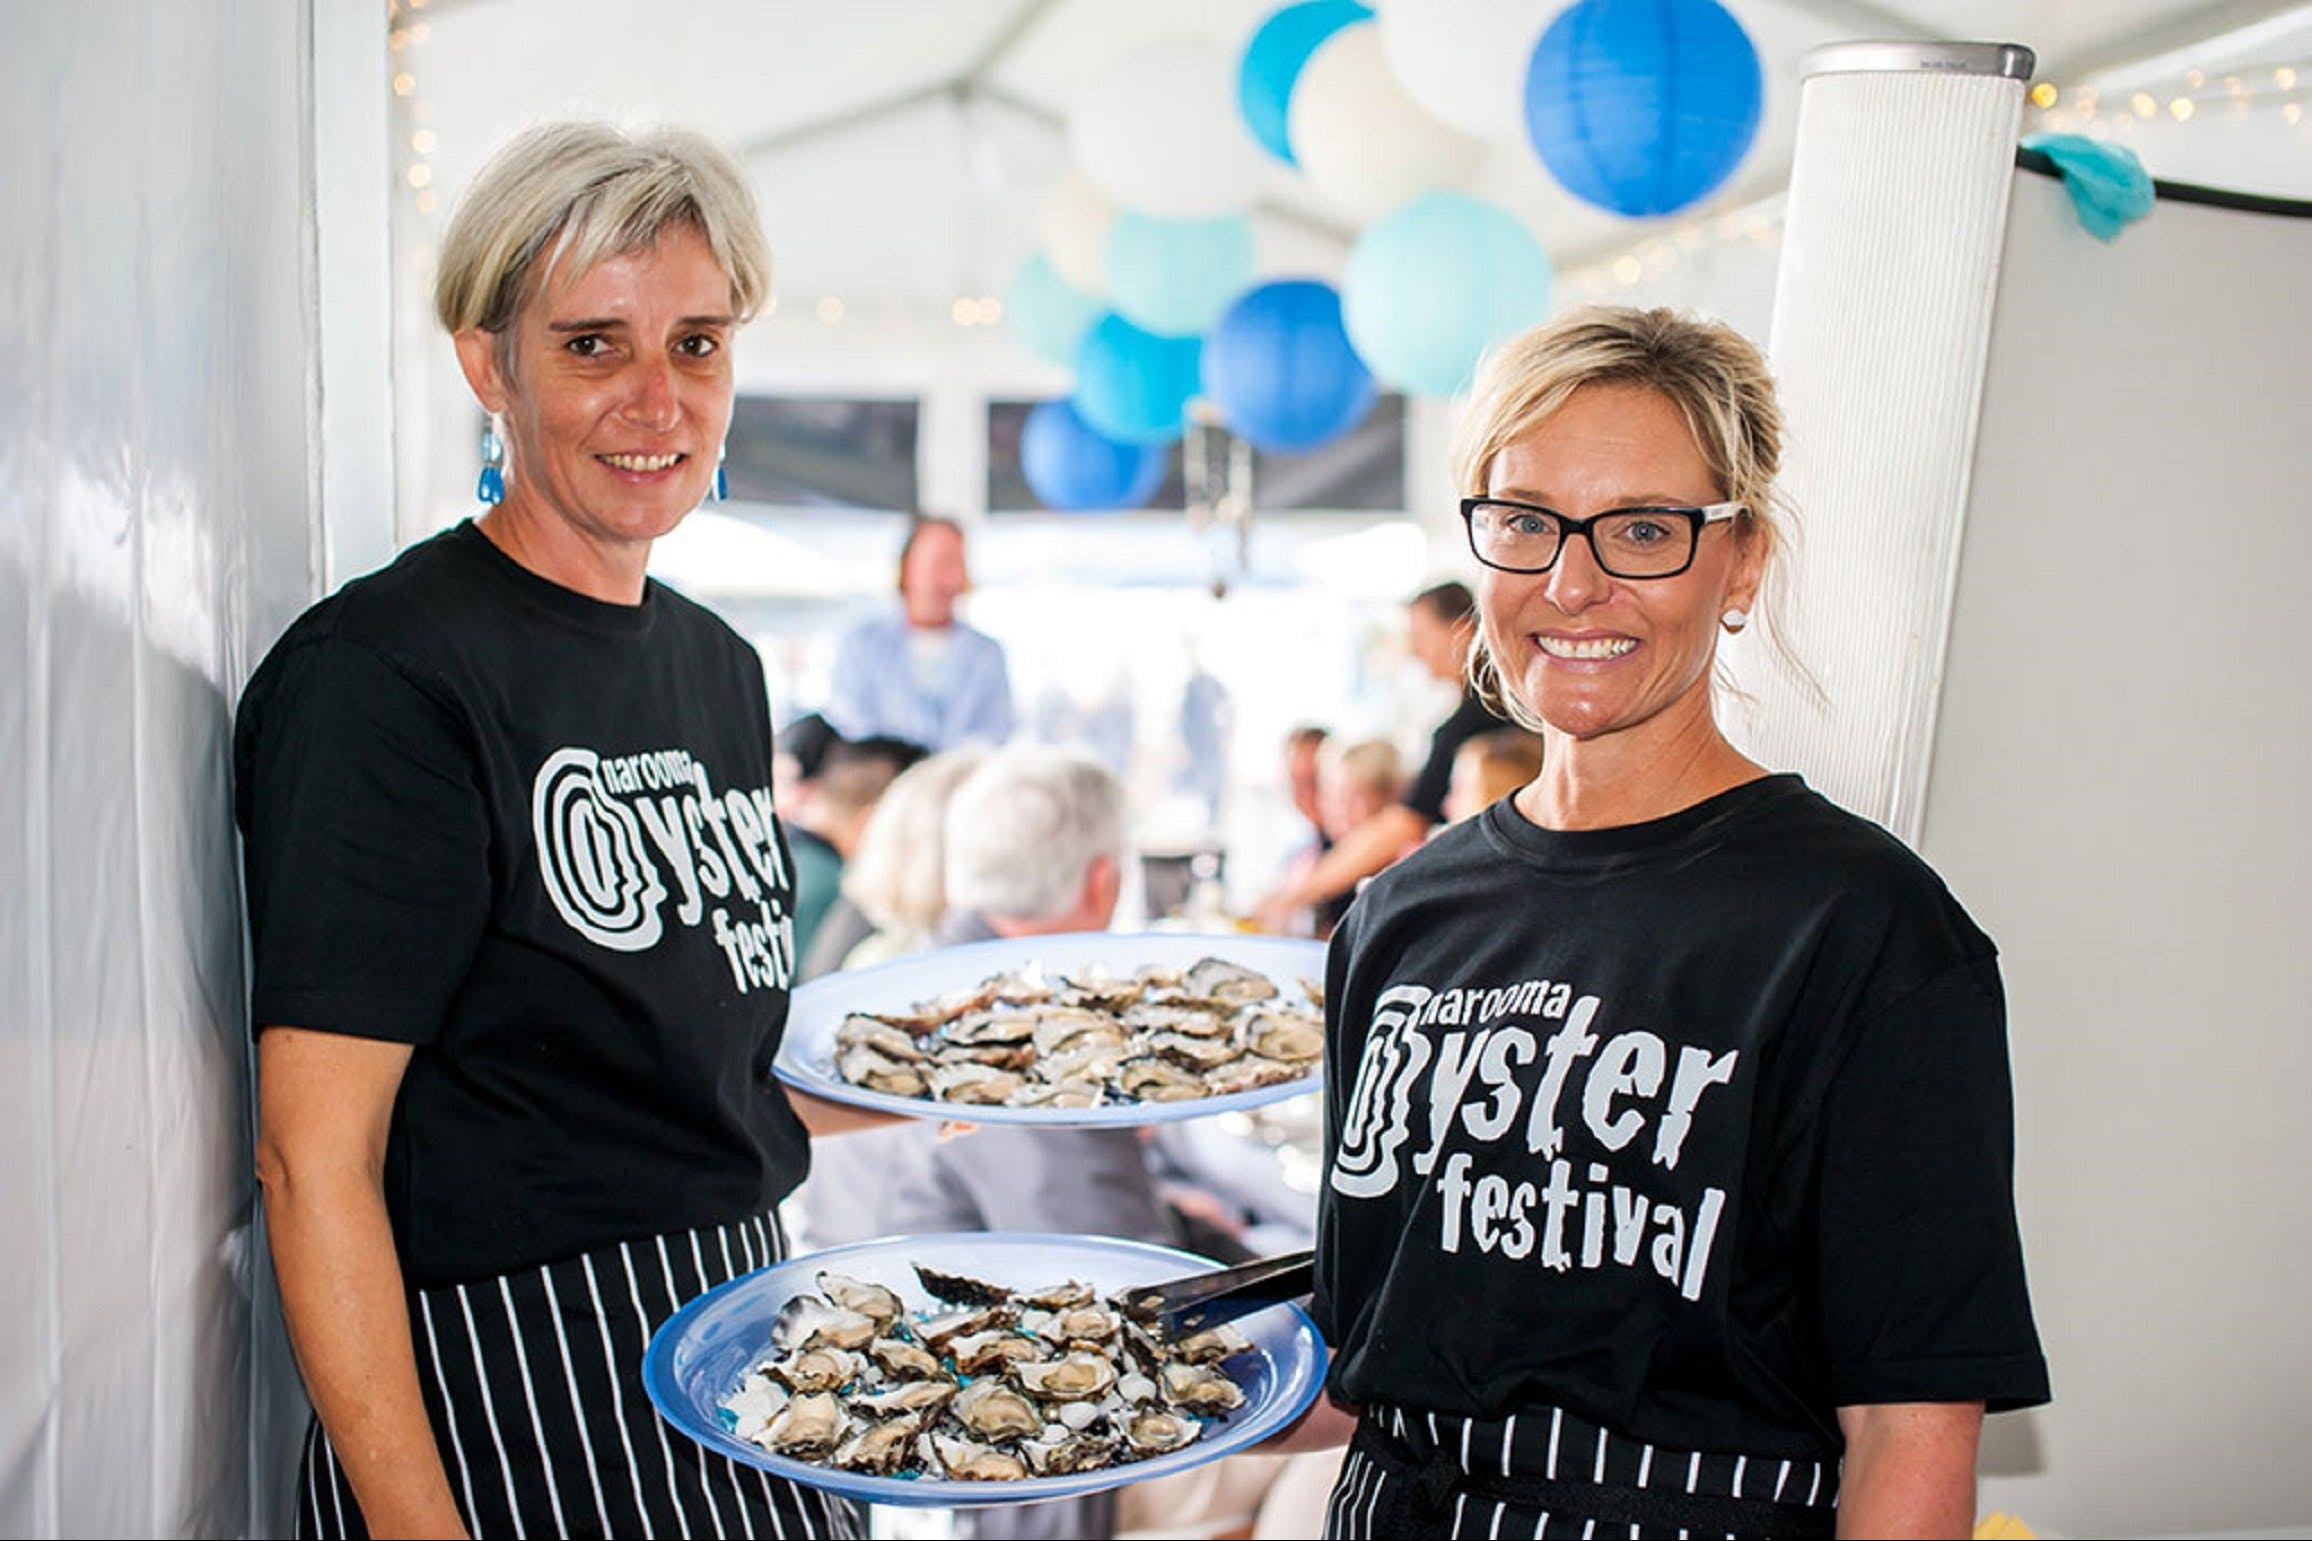 Narooma Oyster Festival - Broome Tourism